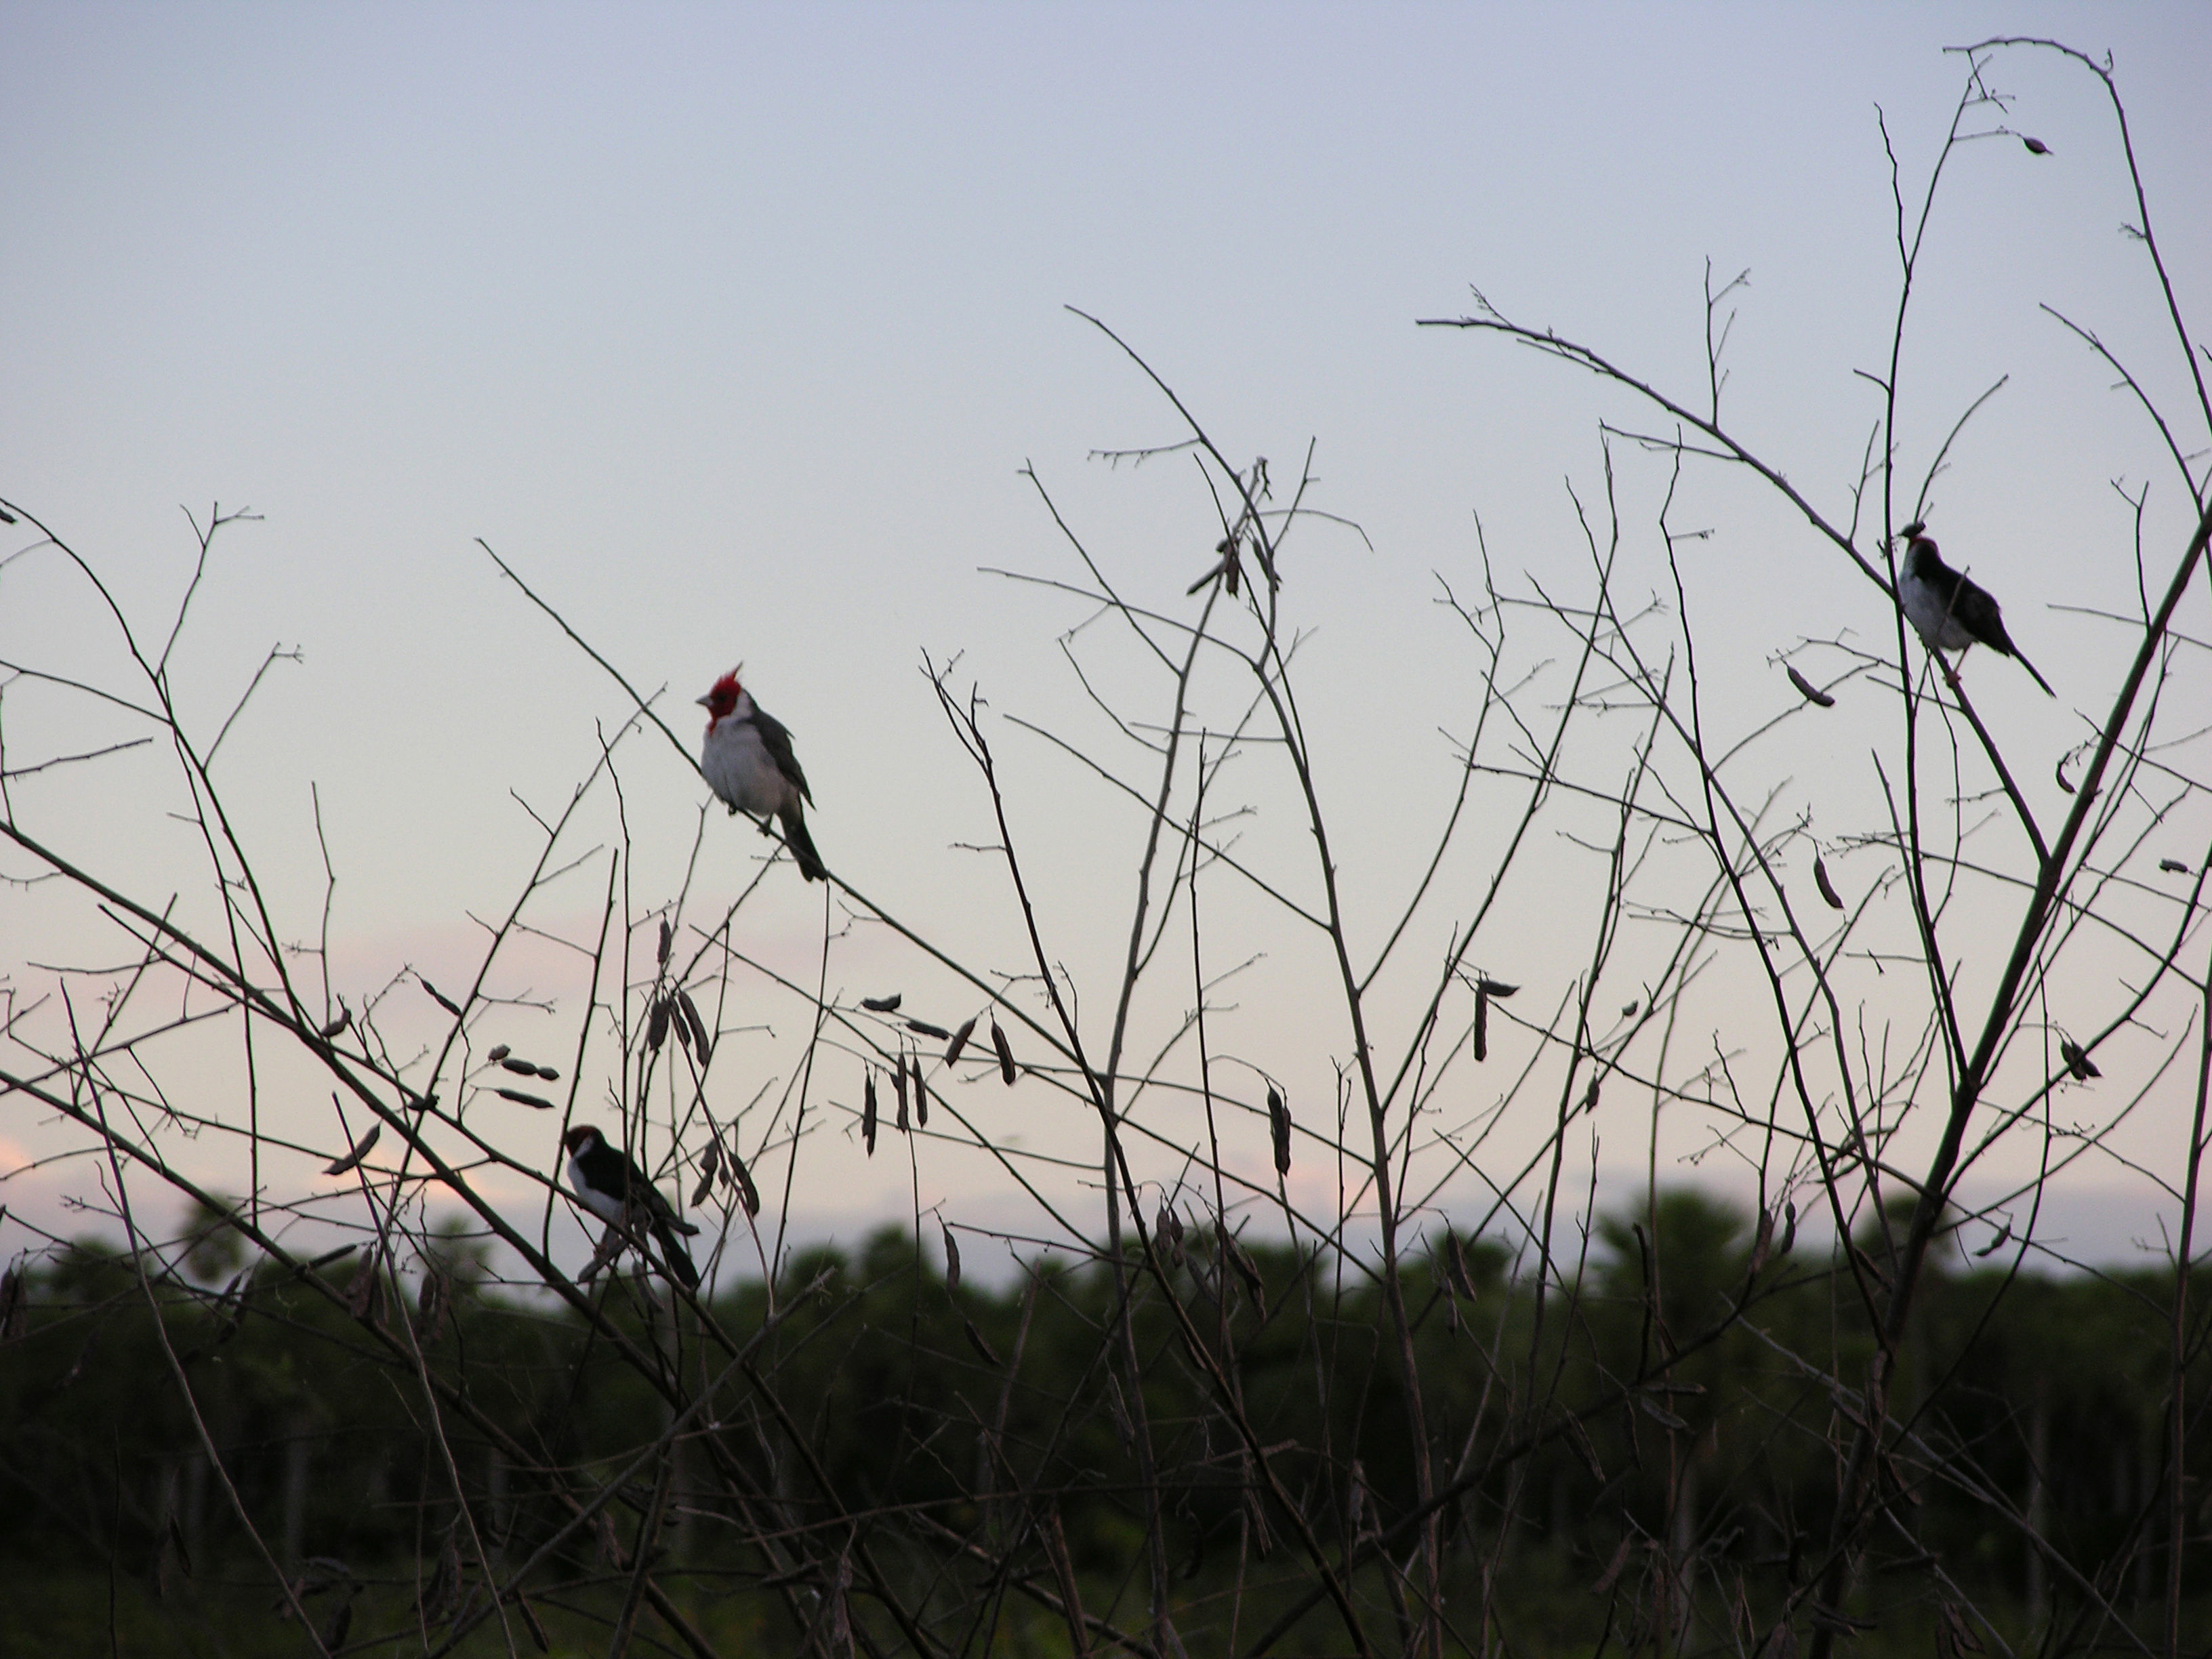 Image of Red-crested Cardinal